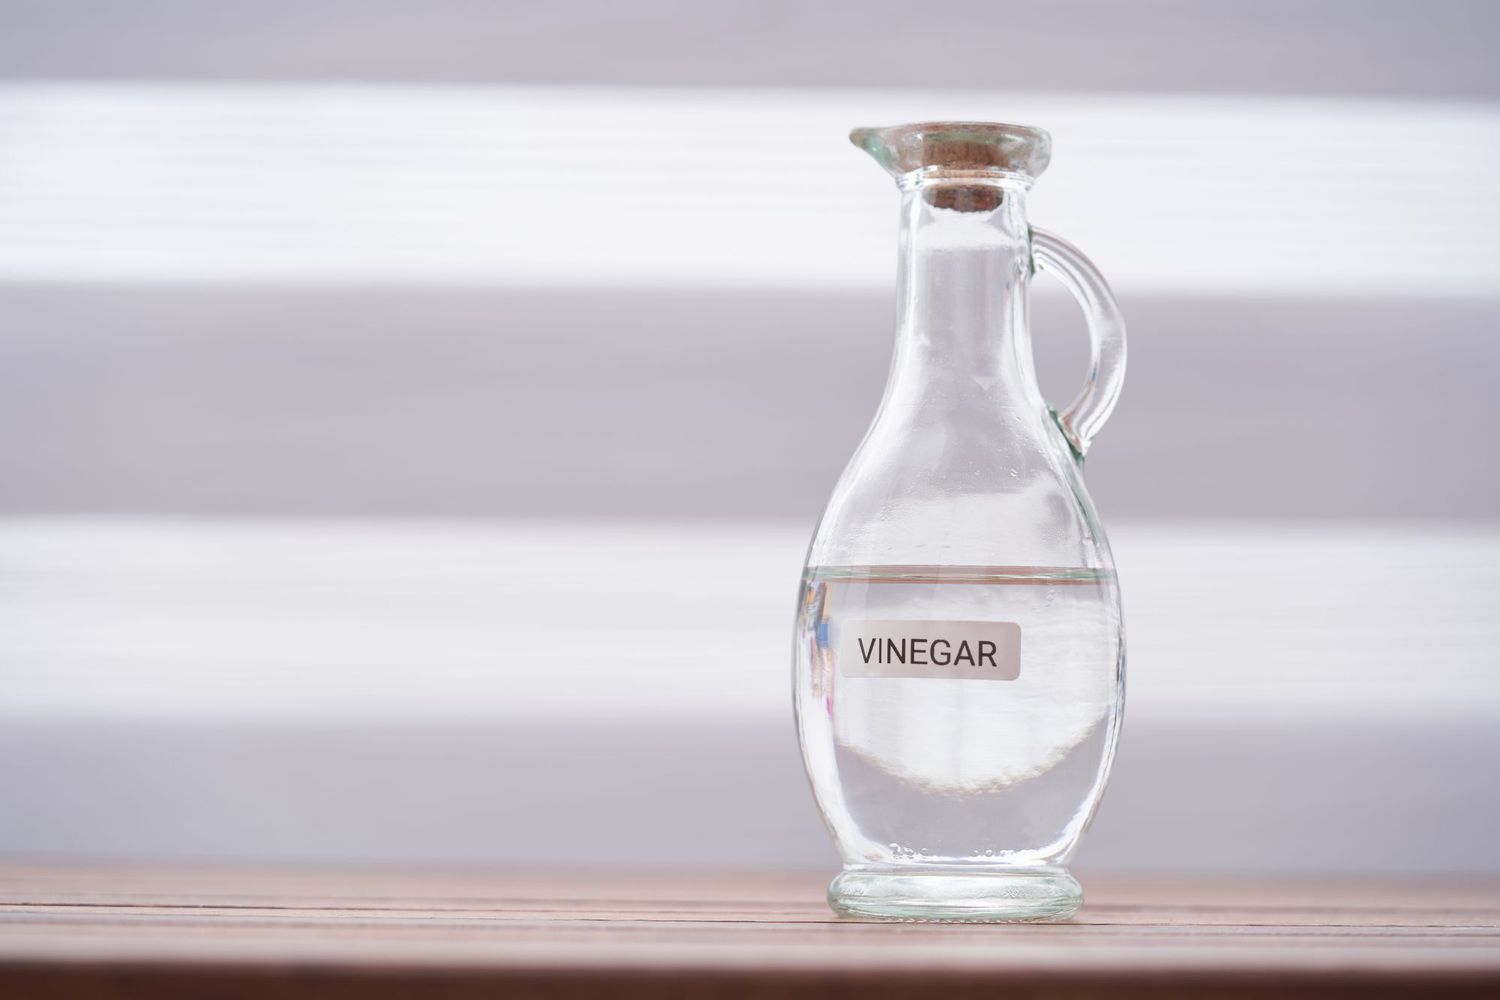 How to Test Platinum at Home With Vinegar